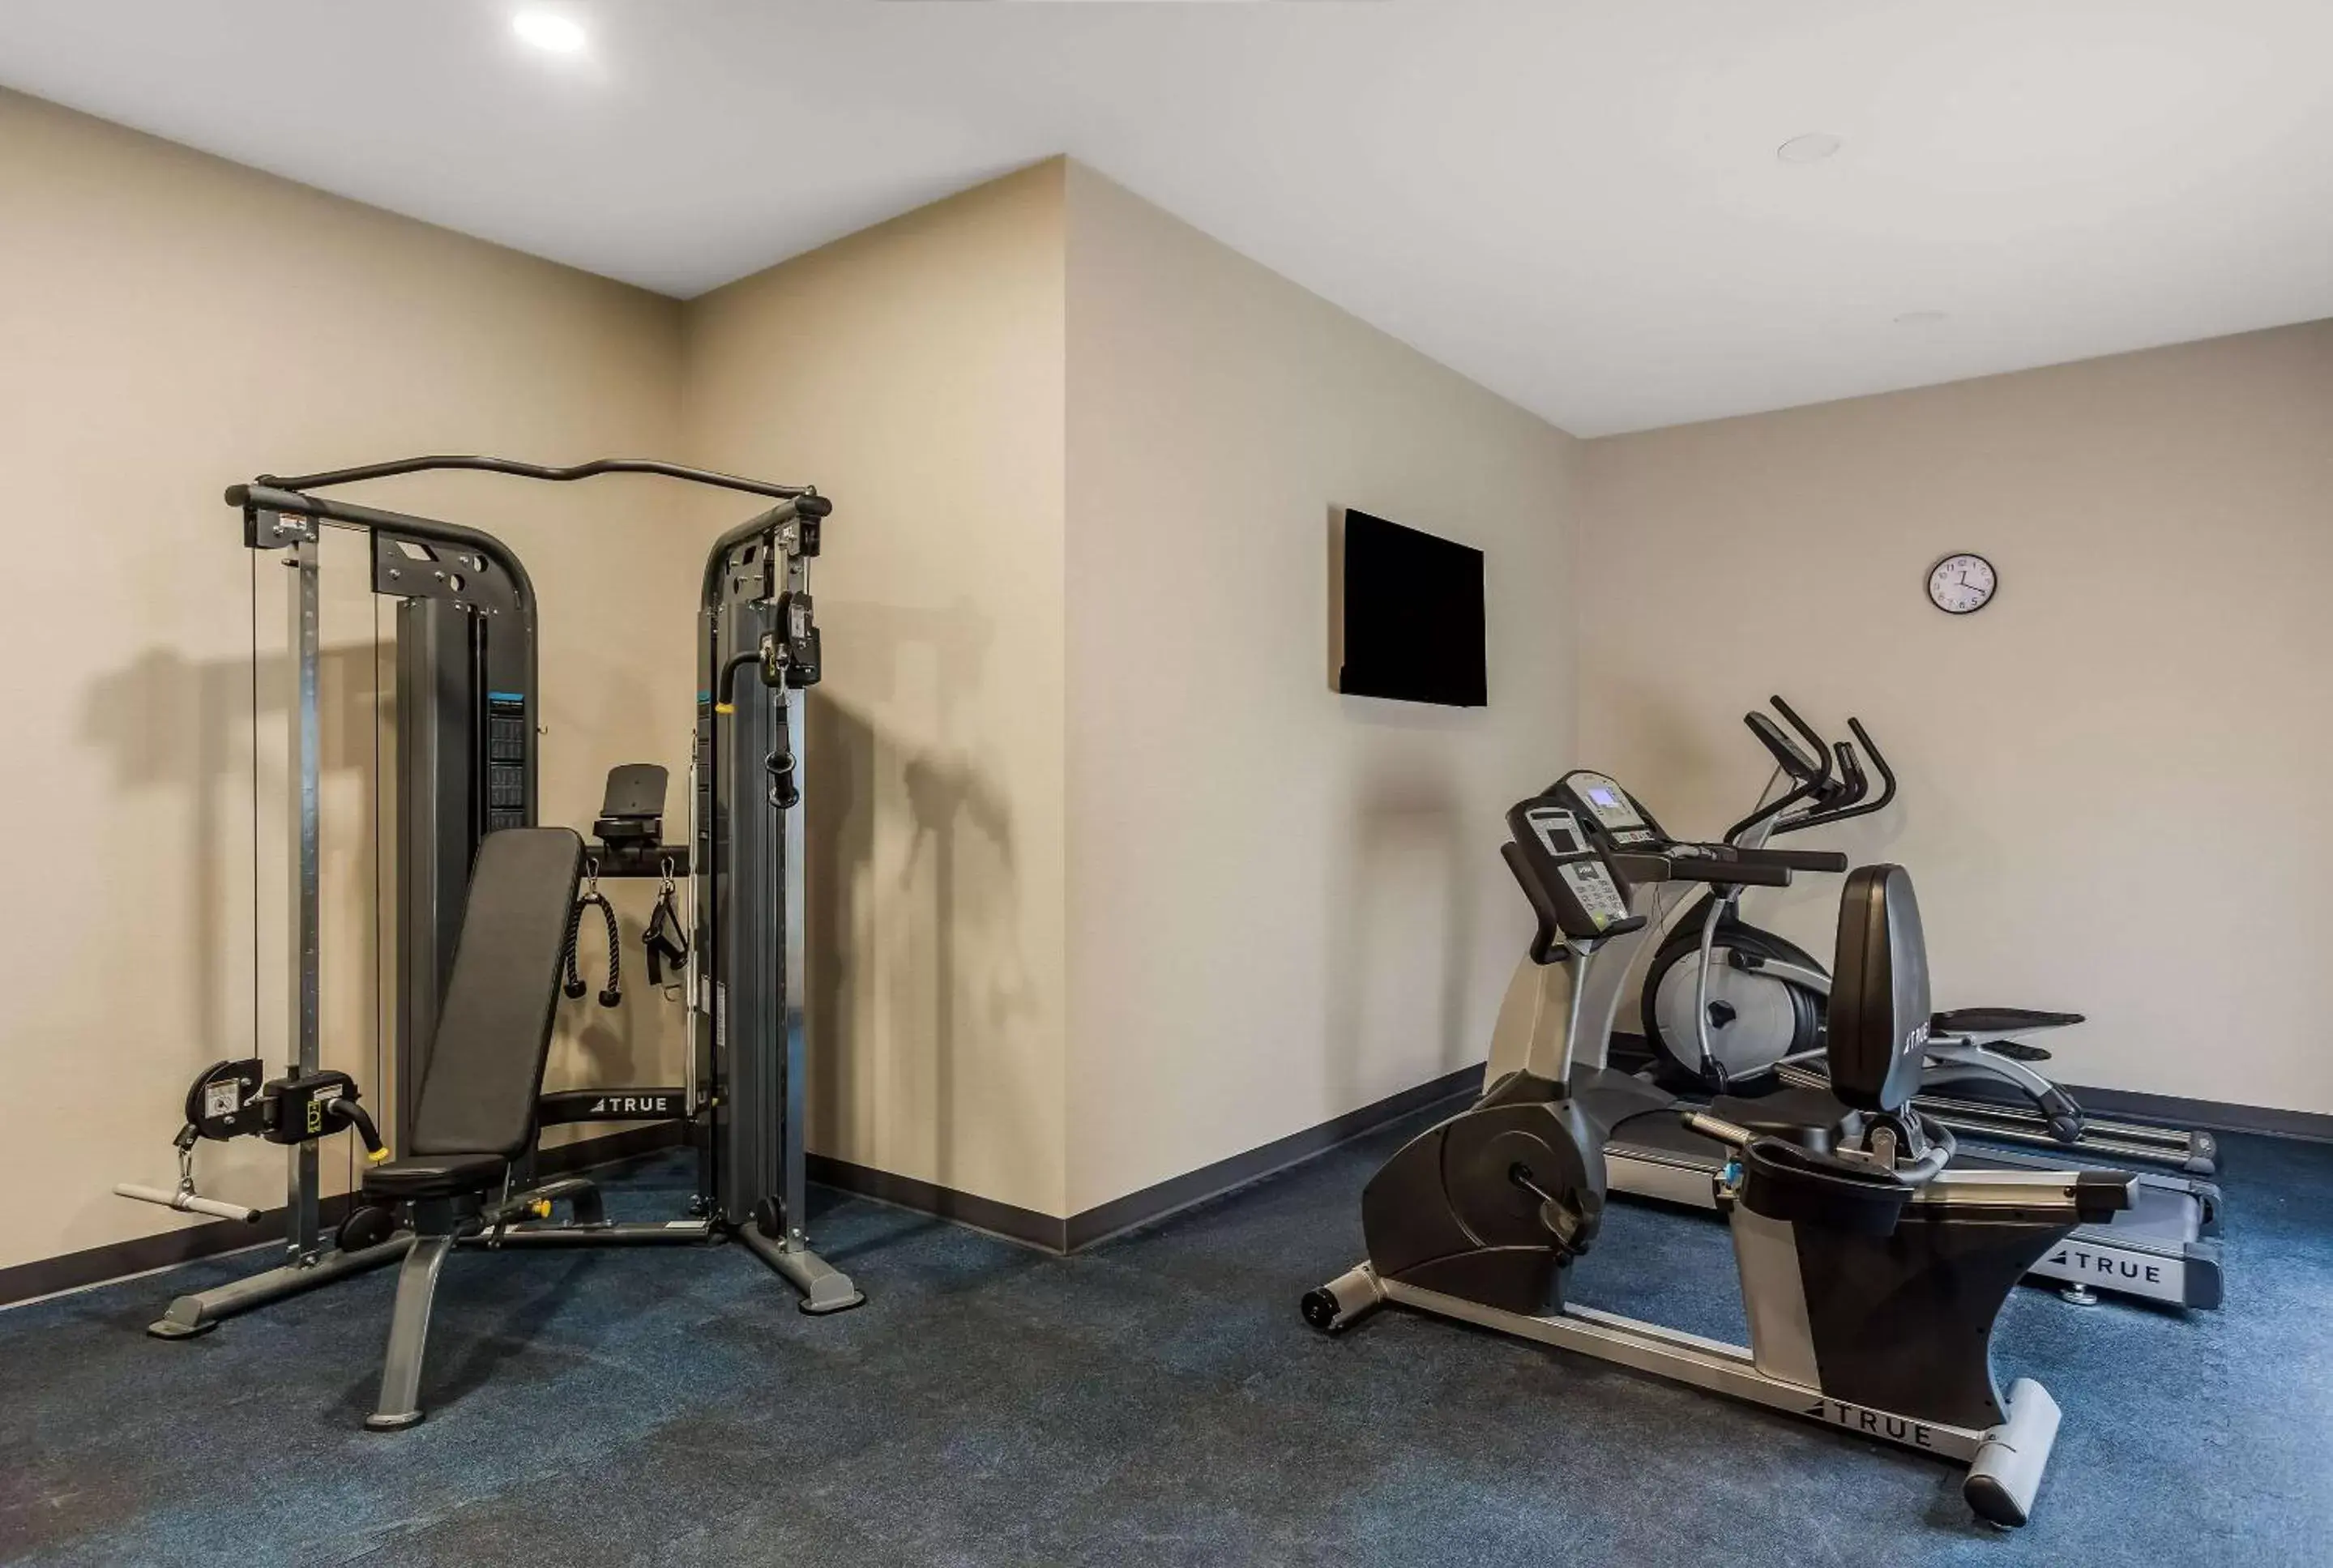 Fitness centre/facilities, Fitness Center/Facilities in MainStay Suites Bourbonnais - Kankakee